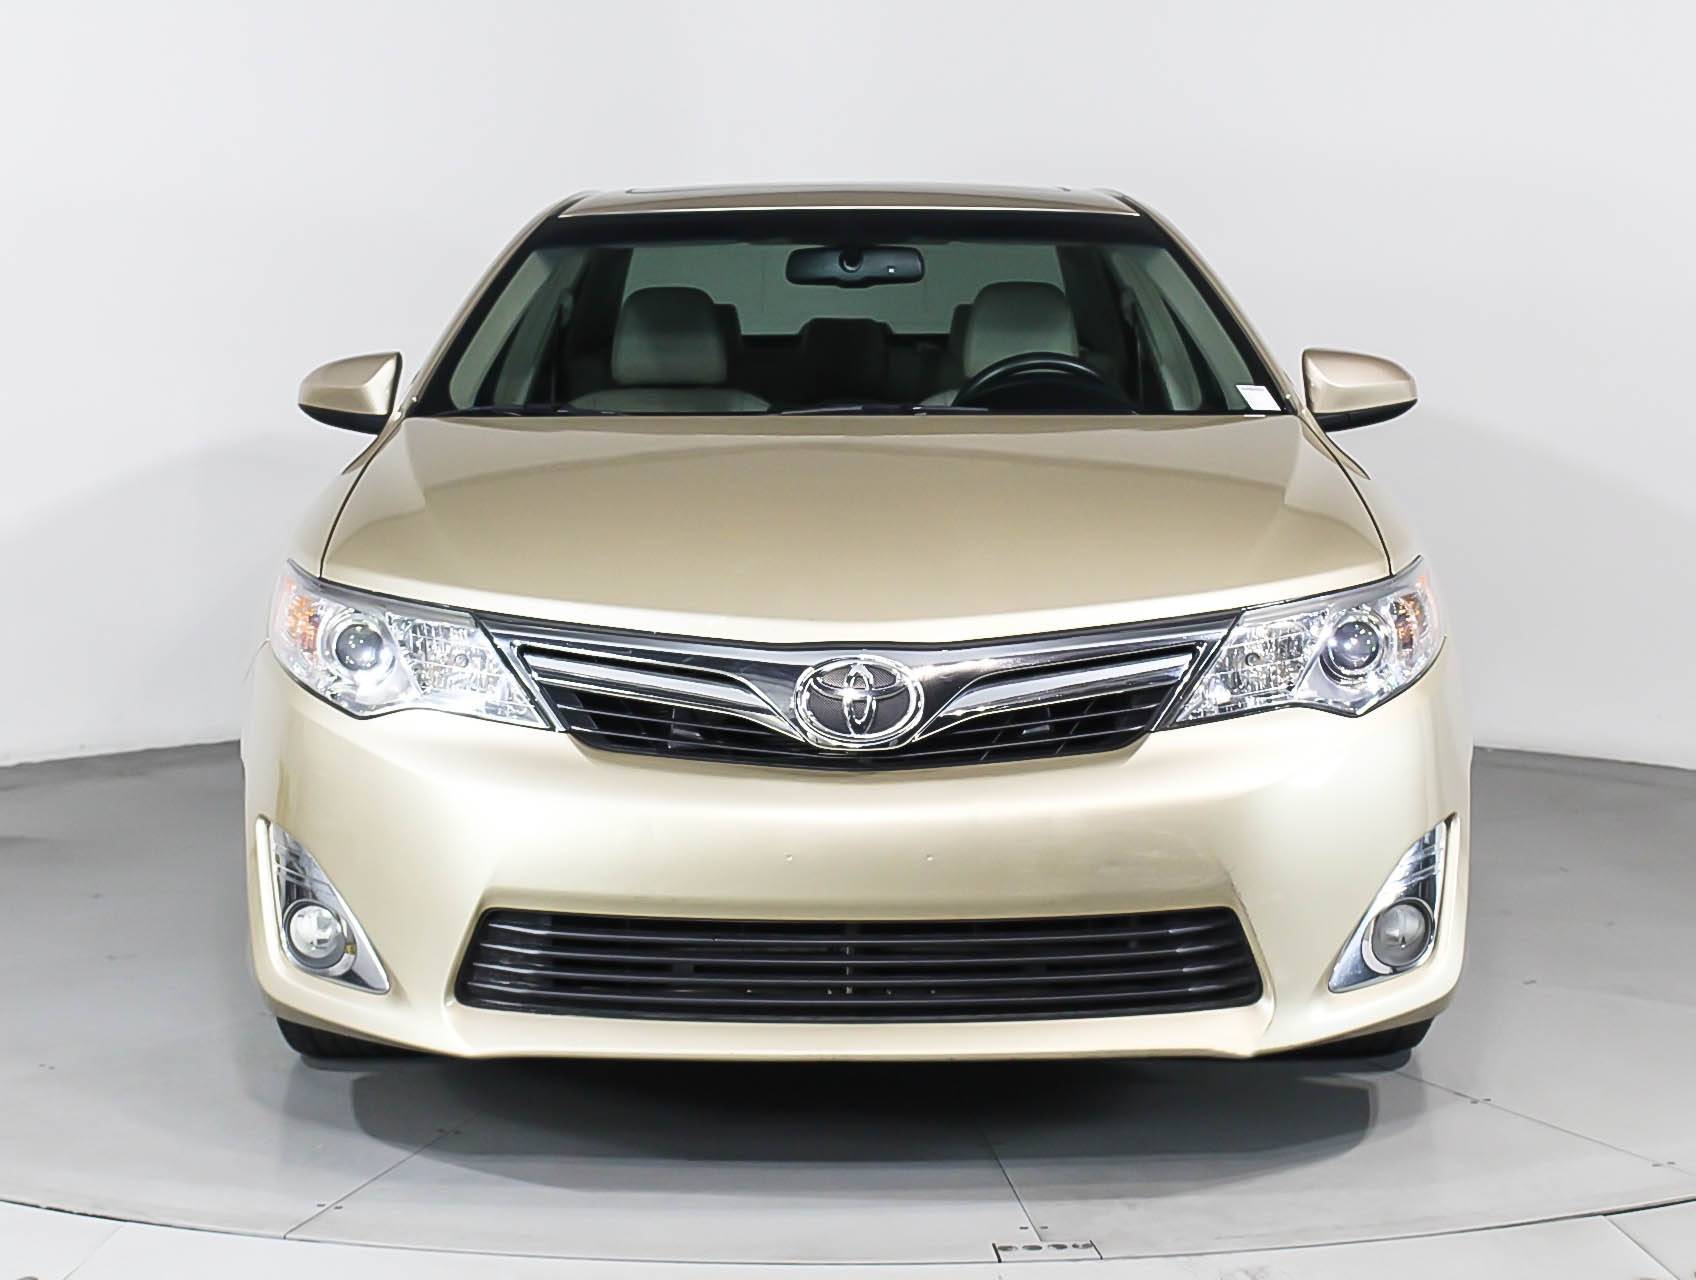 Florida Fine Cars - Used TOYOTA CAMRY 2012 HOLLYWOOD Xle